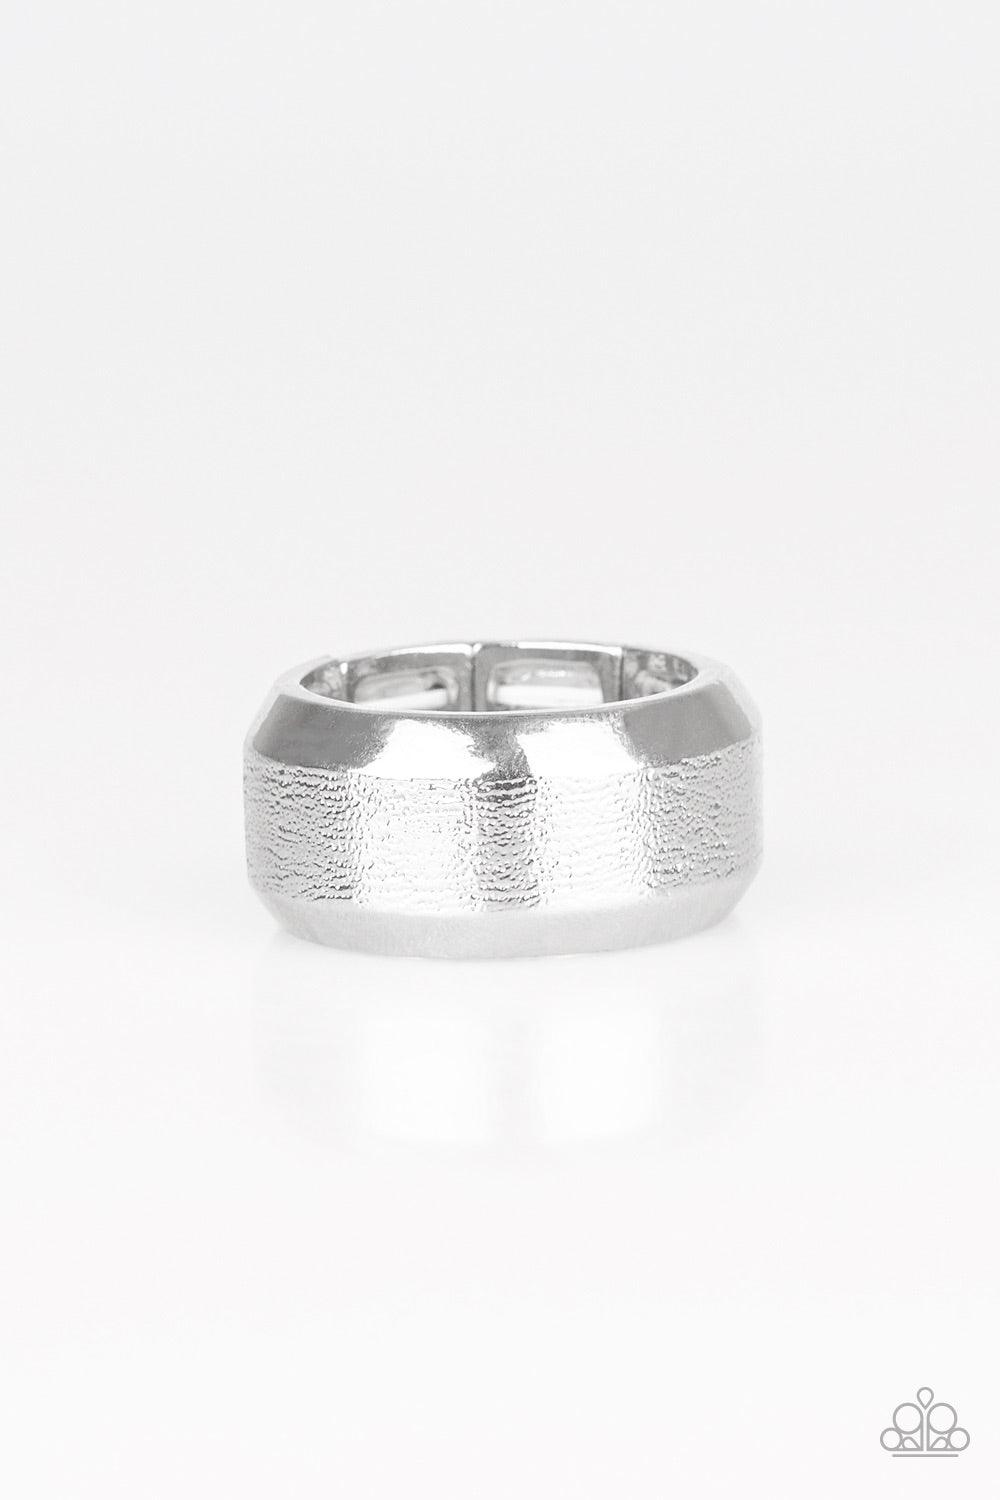 Paparazzi Accessories Checkmate - Silver The center of a beveled silver band has been delicately hammered in shimmery detail for a metro inspired look. Features a stretchy band for a flexible fit. Jewelry